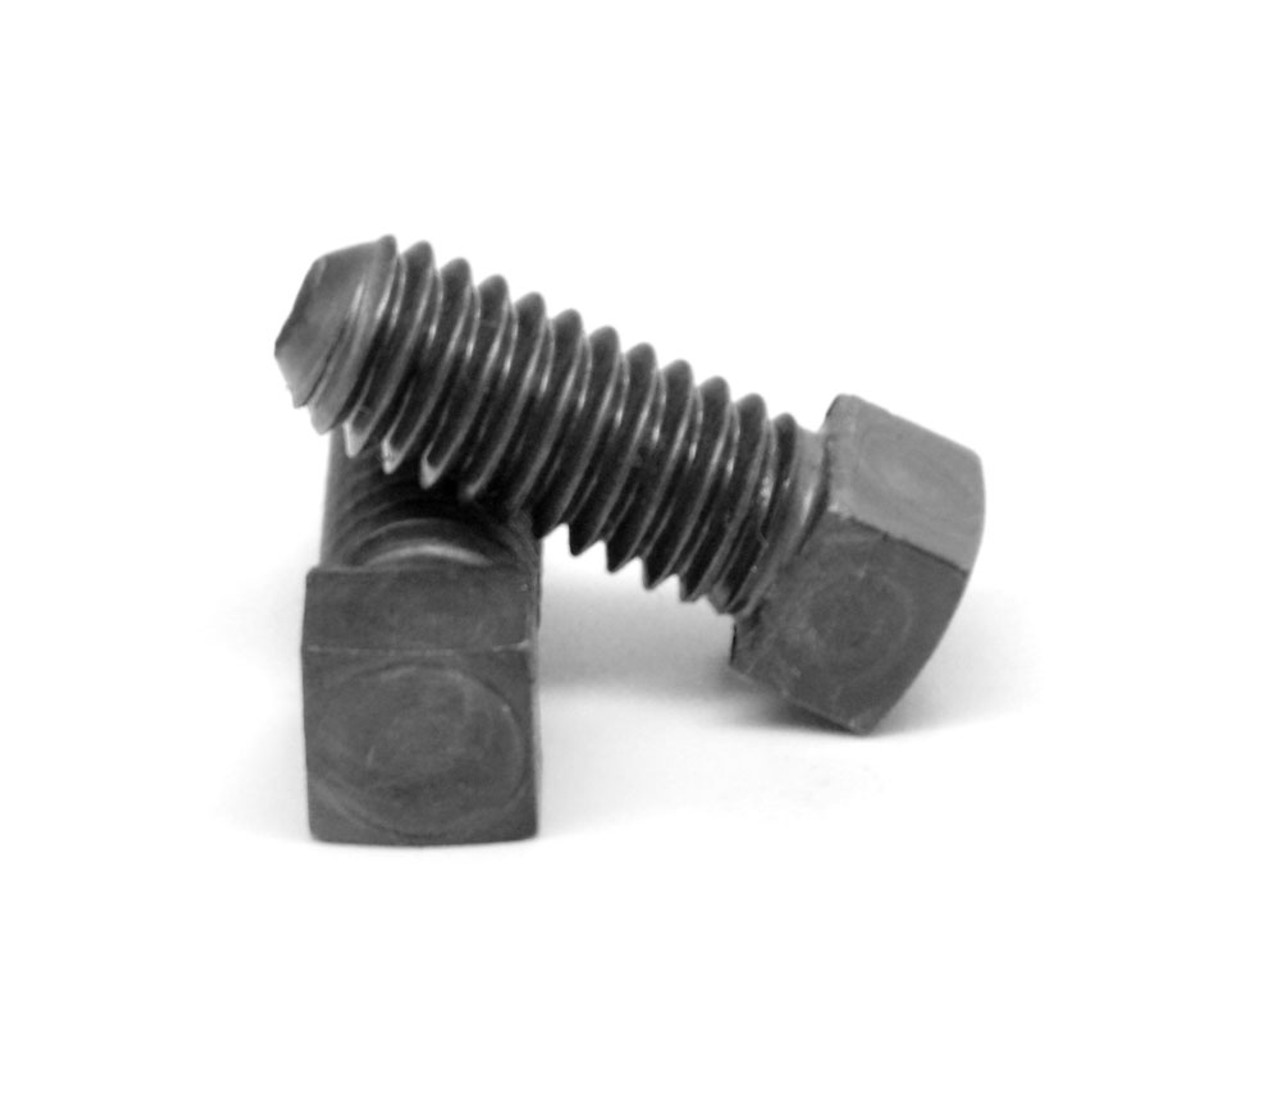 1 1/8"-7 x 4" (FT) Coarse Thread Square Head Set Screw Cup Point Low Carbon Steel Case Hardened Plain Finish